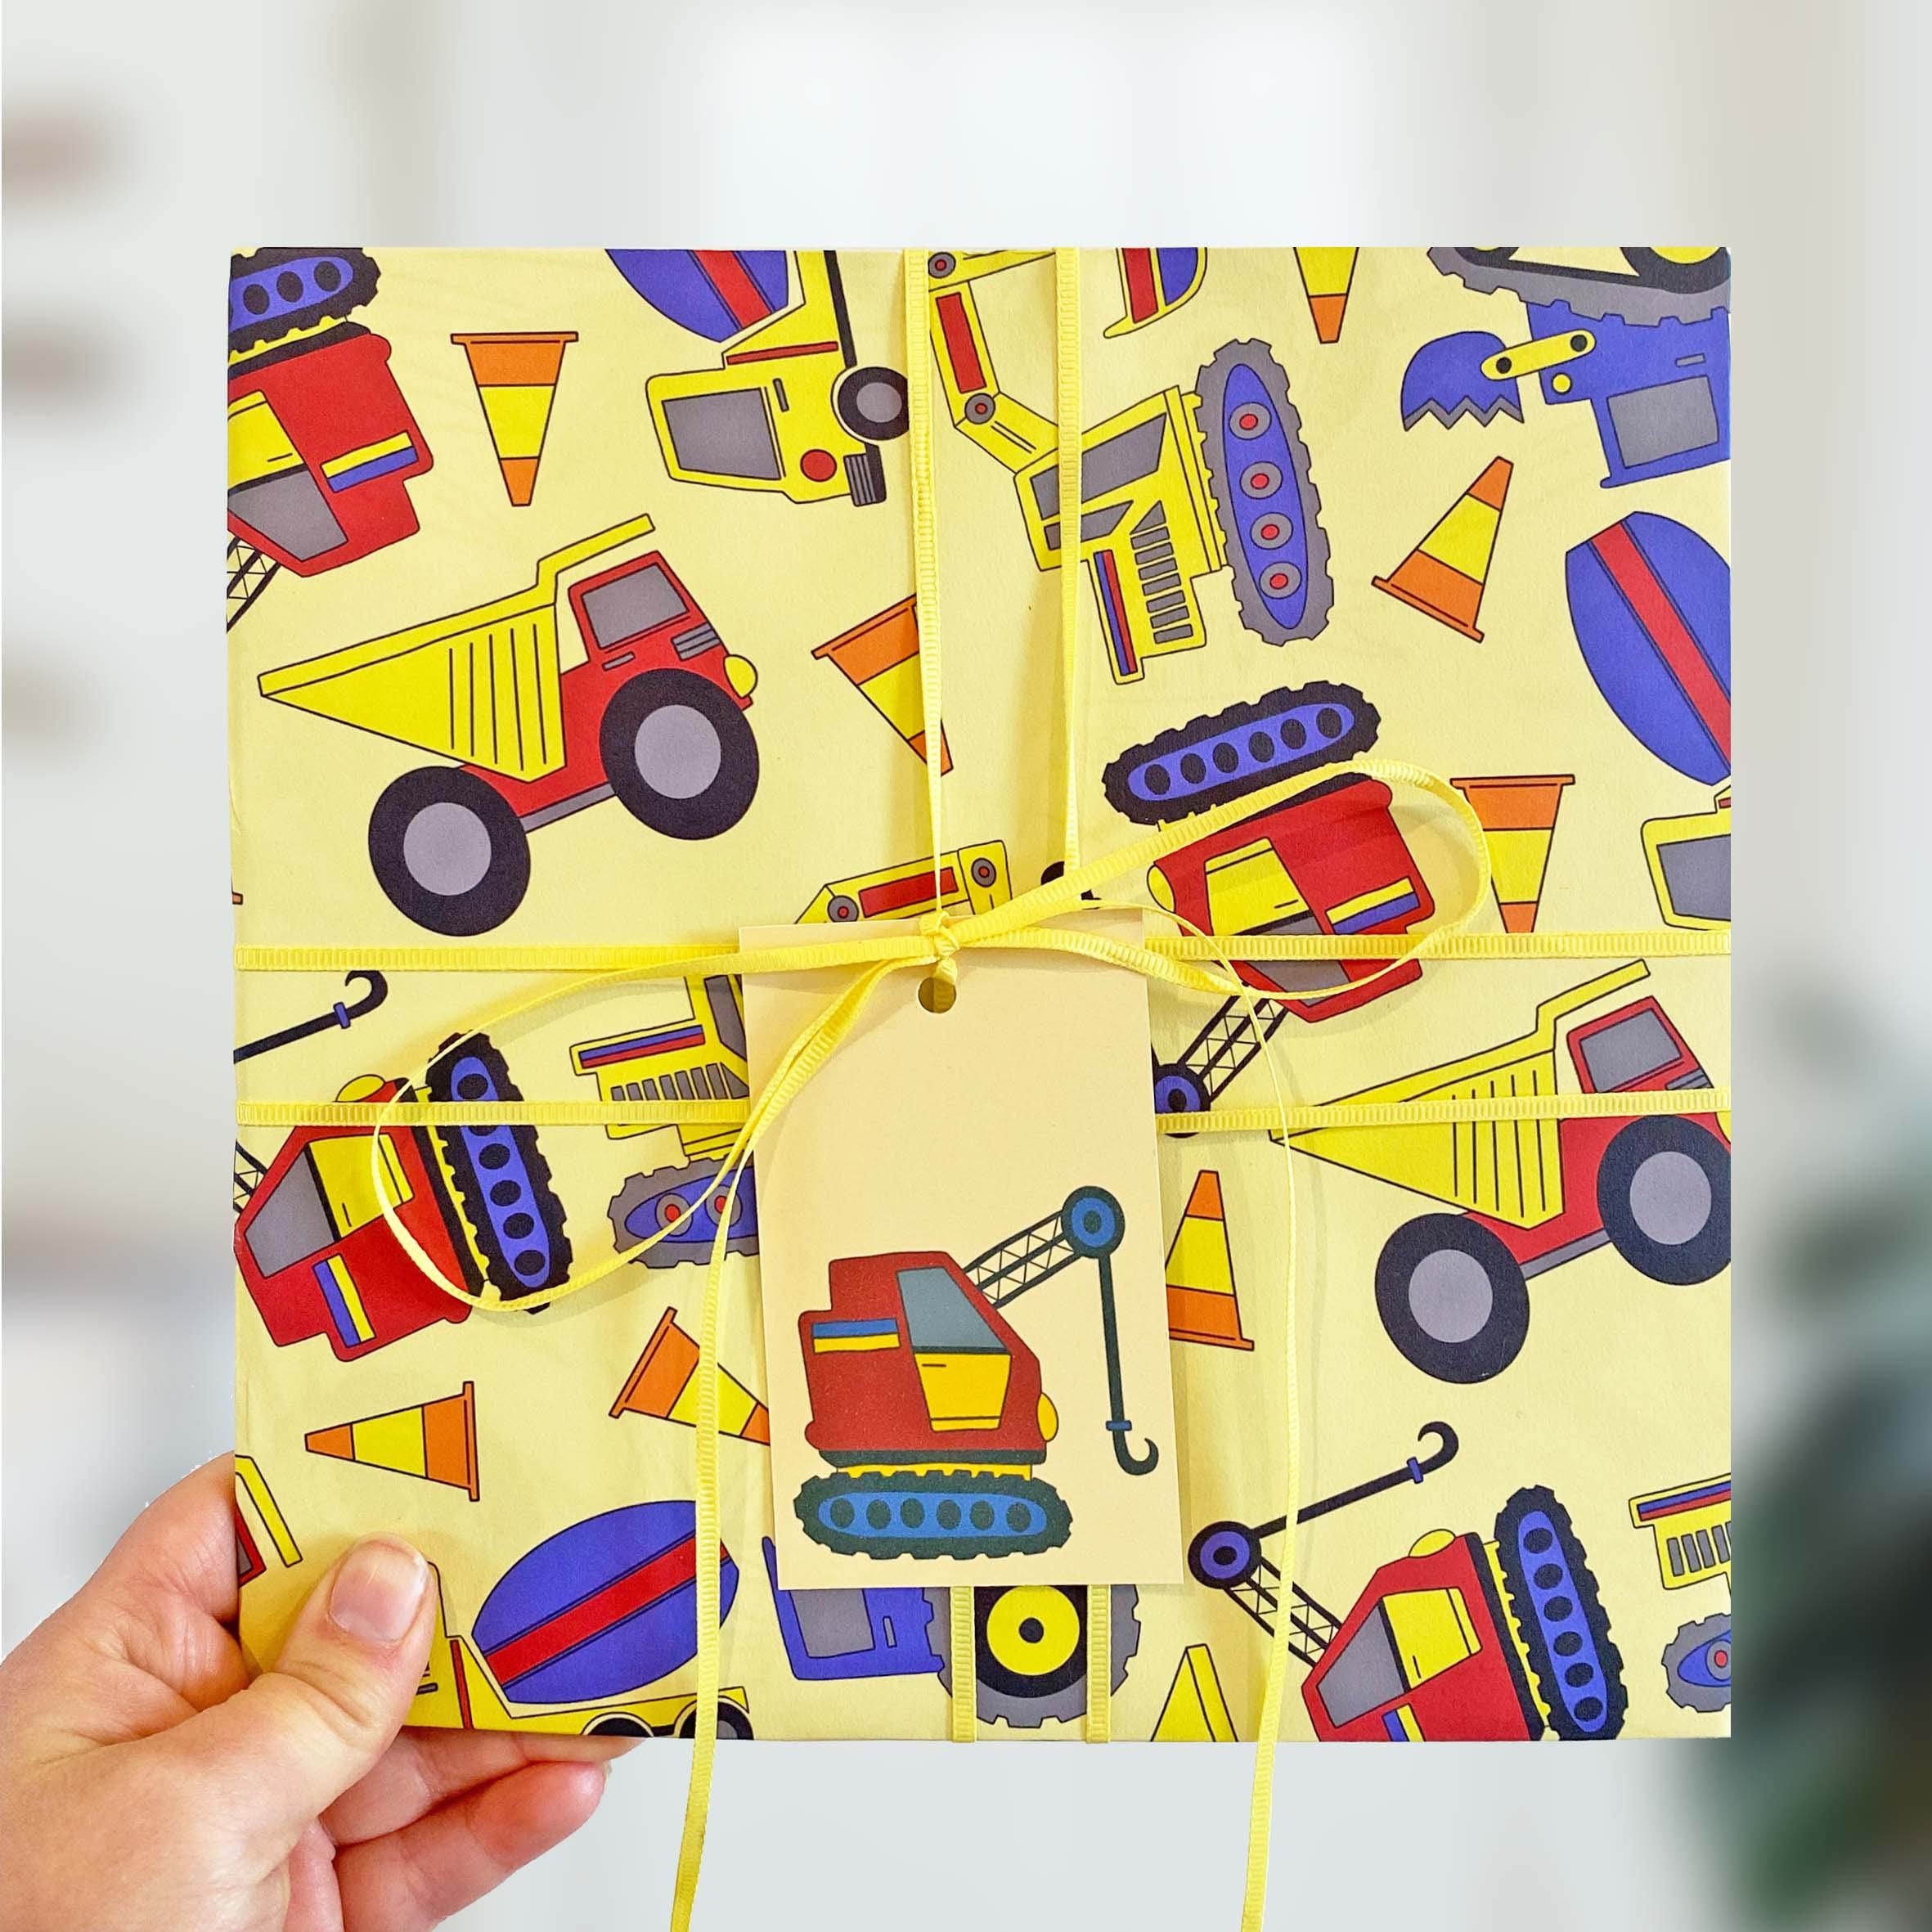 Digger Wrapping Paper and Gift Tags 